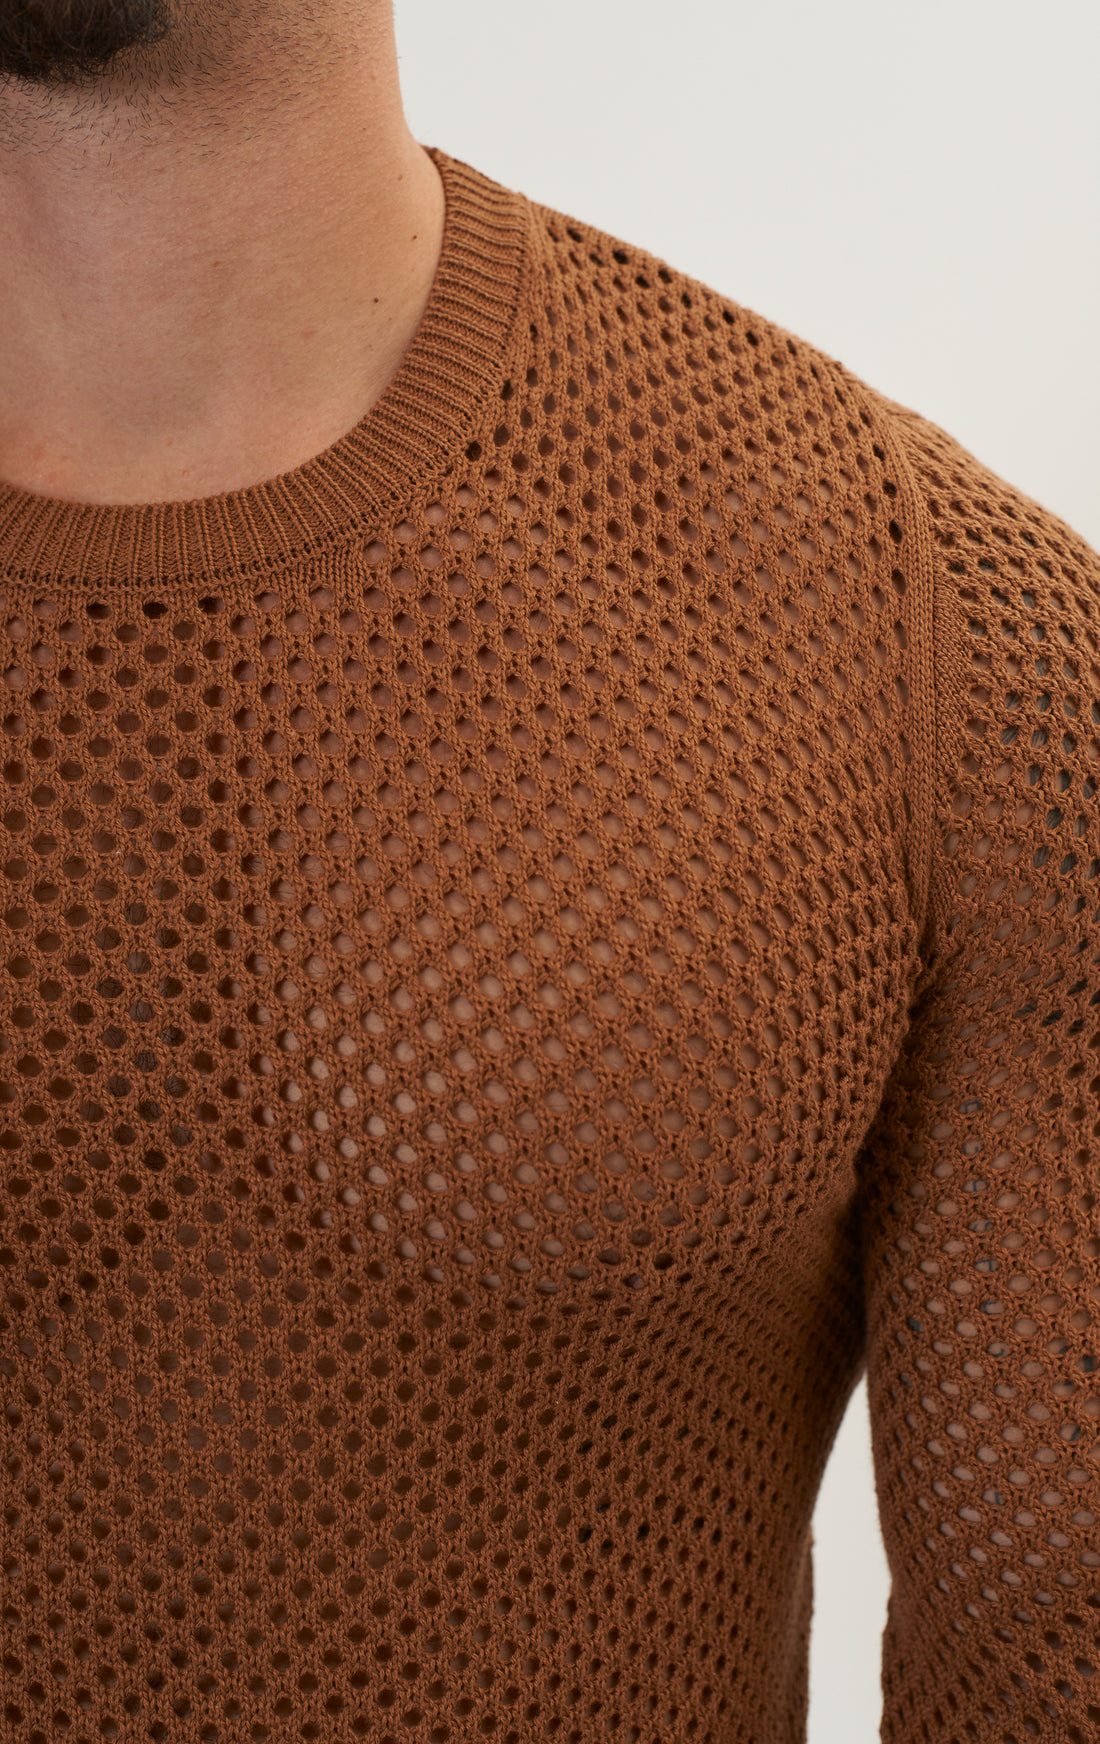 See Through Fishnet Muscle Fit Shirt - Light Brown